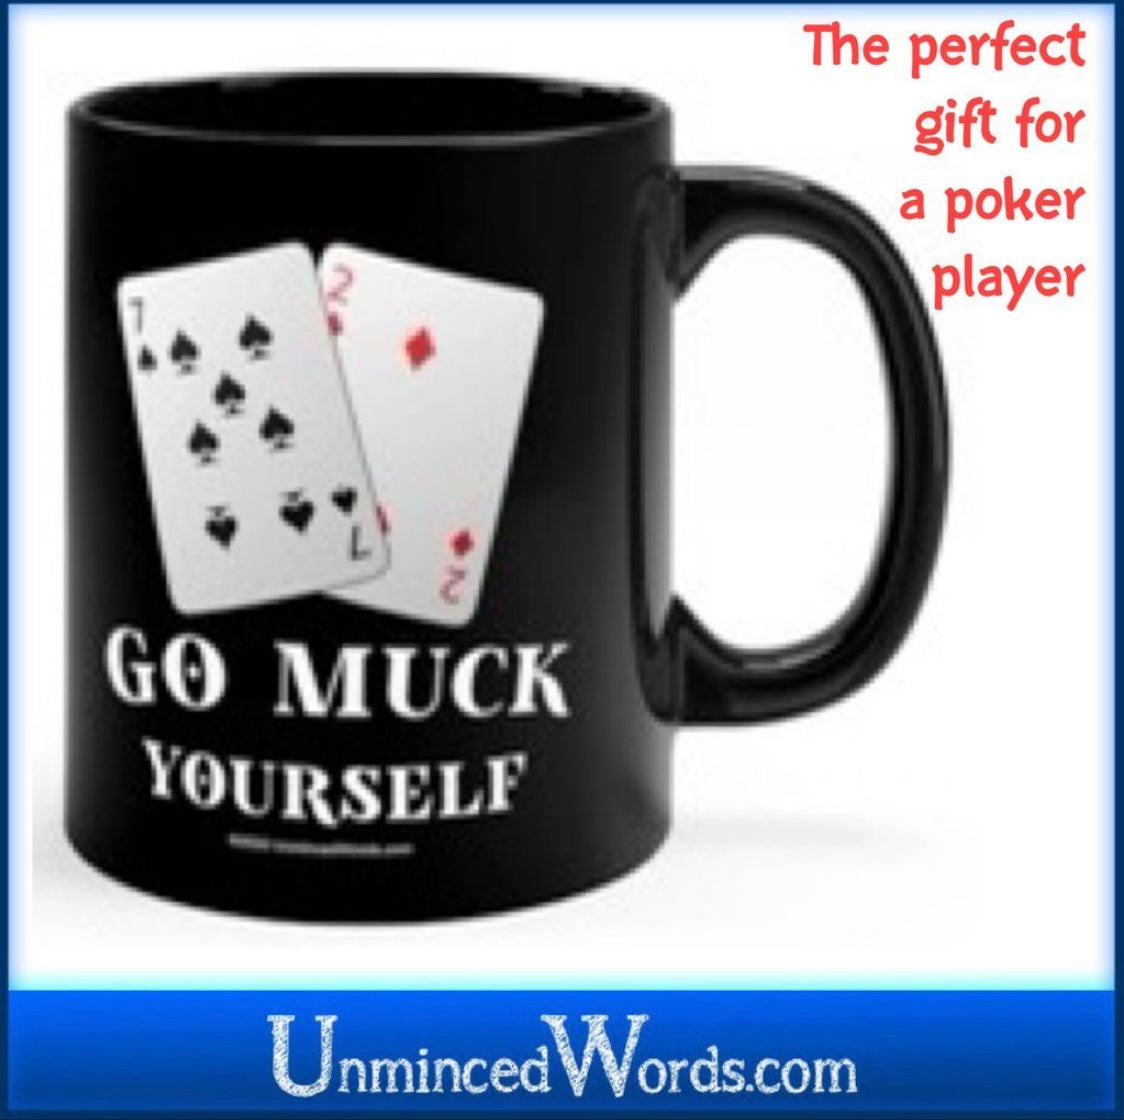 Go All In on this great Poker gift